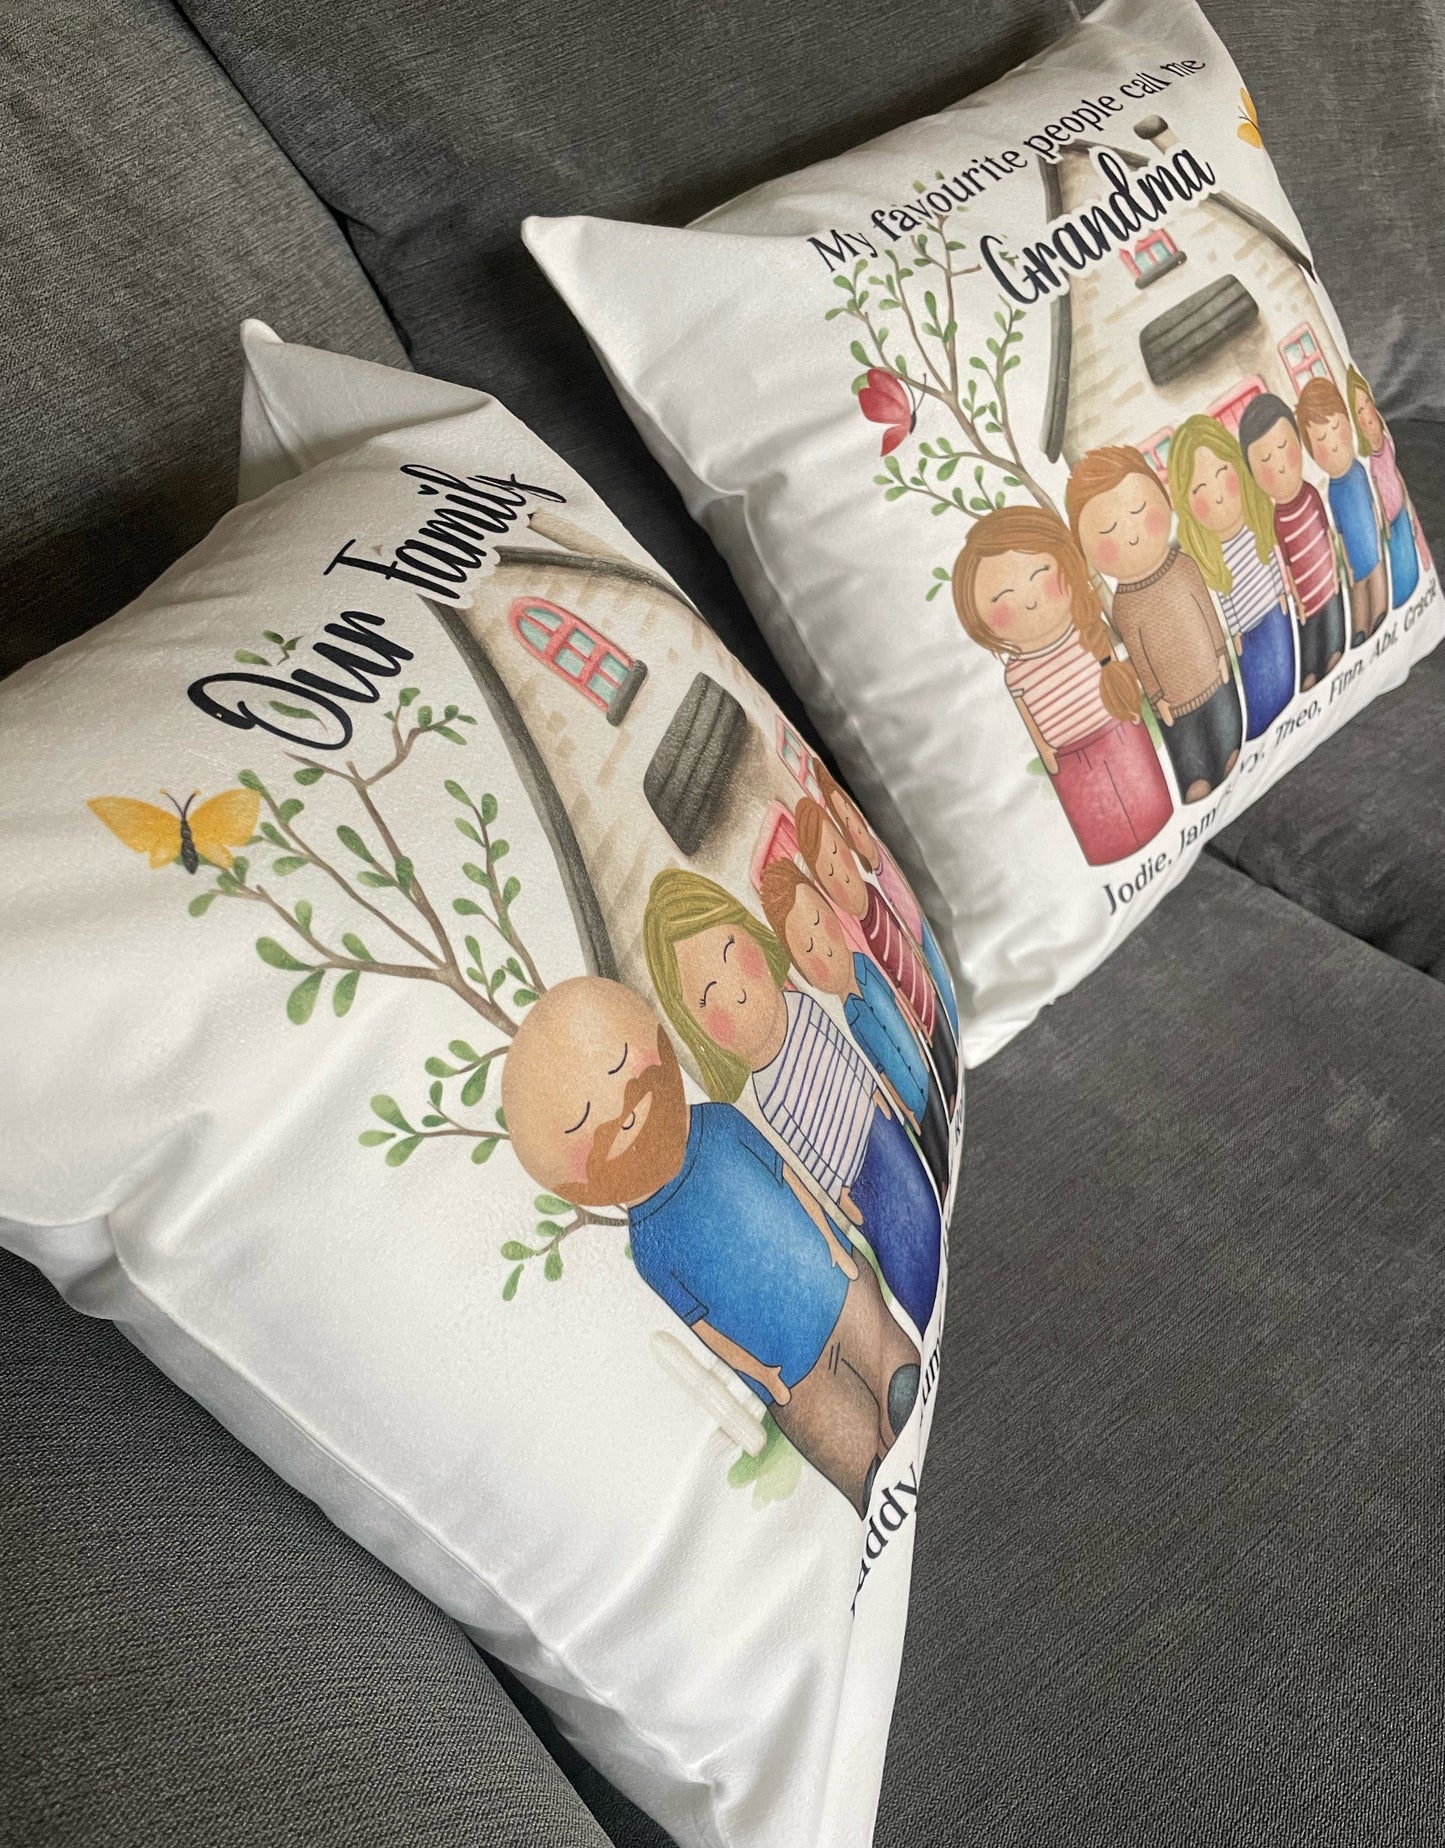 Peg Family My Favourite People Personalised Cushion